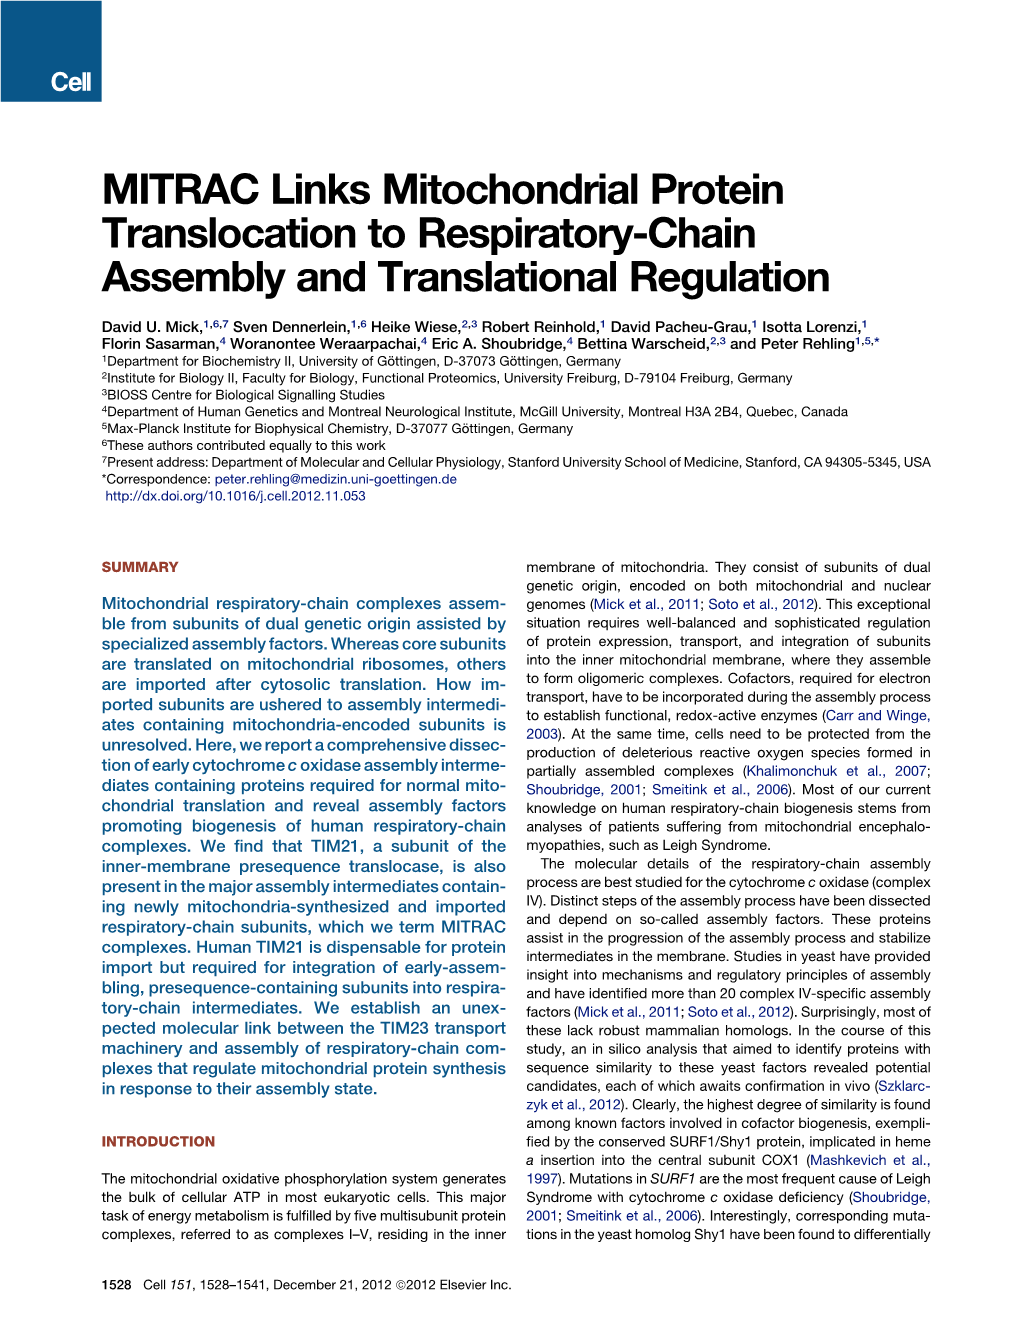 MITRAC Links Mitochondrial Protein Translocation to Respiratory-Chain Assembly and Translational Regulation